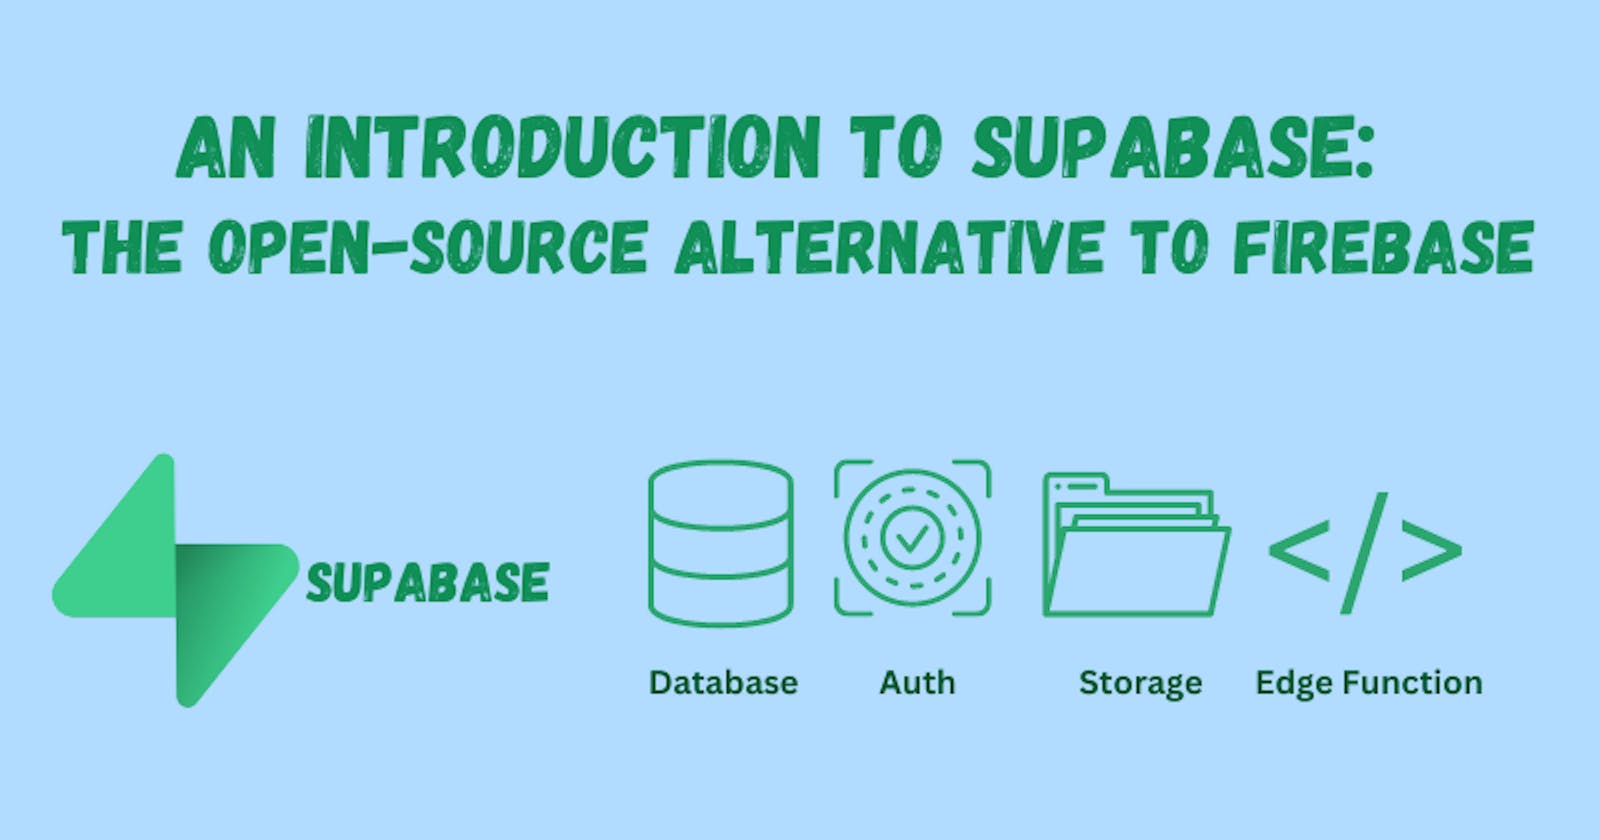 An Introduction to Supabase: The Open-Source Alternative to Firebase